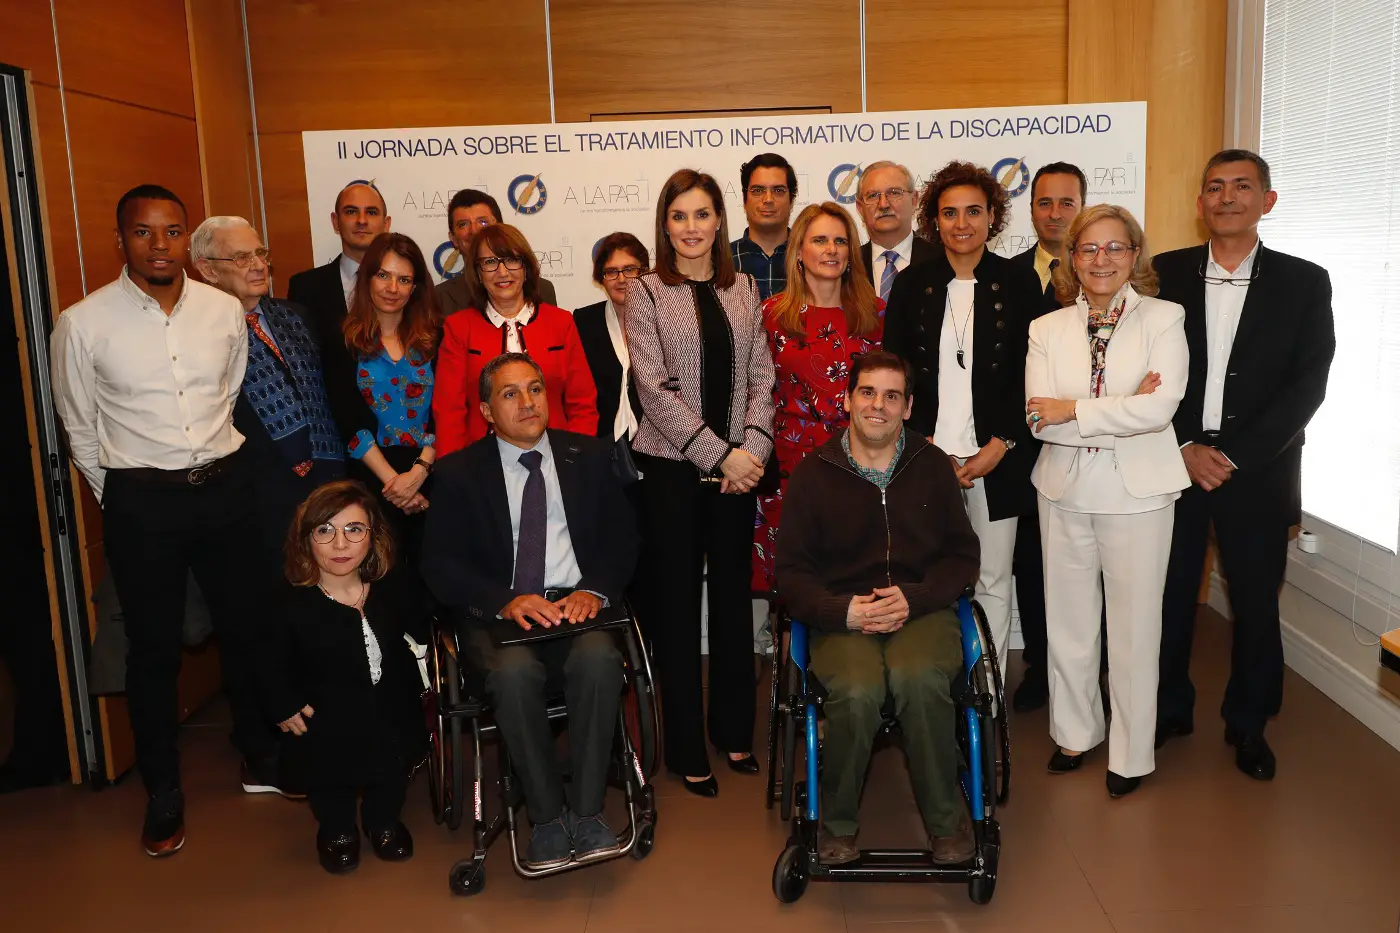 Queen Letizia in familiar style for Conference on Disability